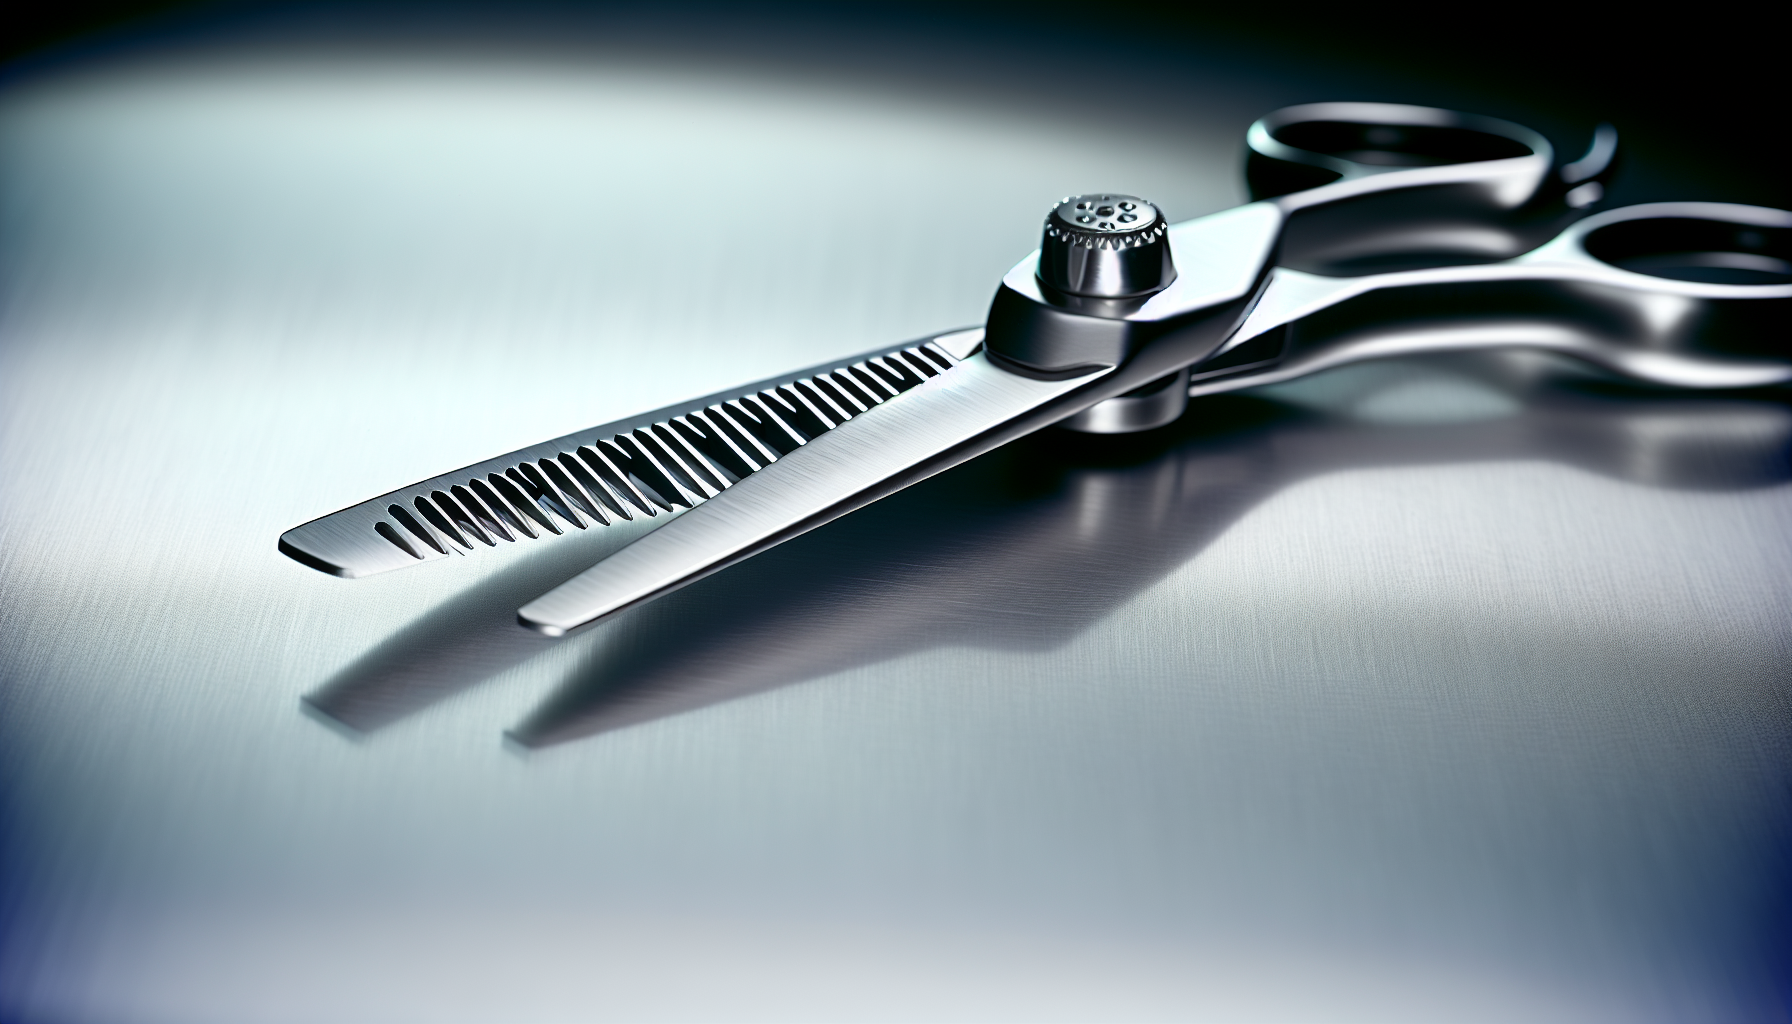 Thinning shears for precise grooming